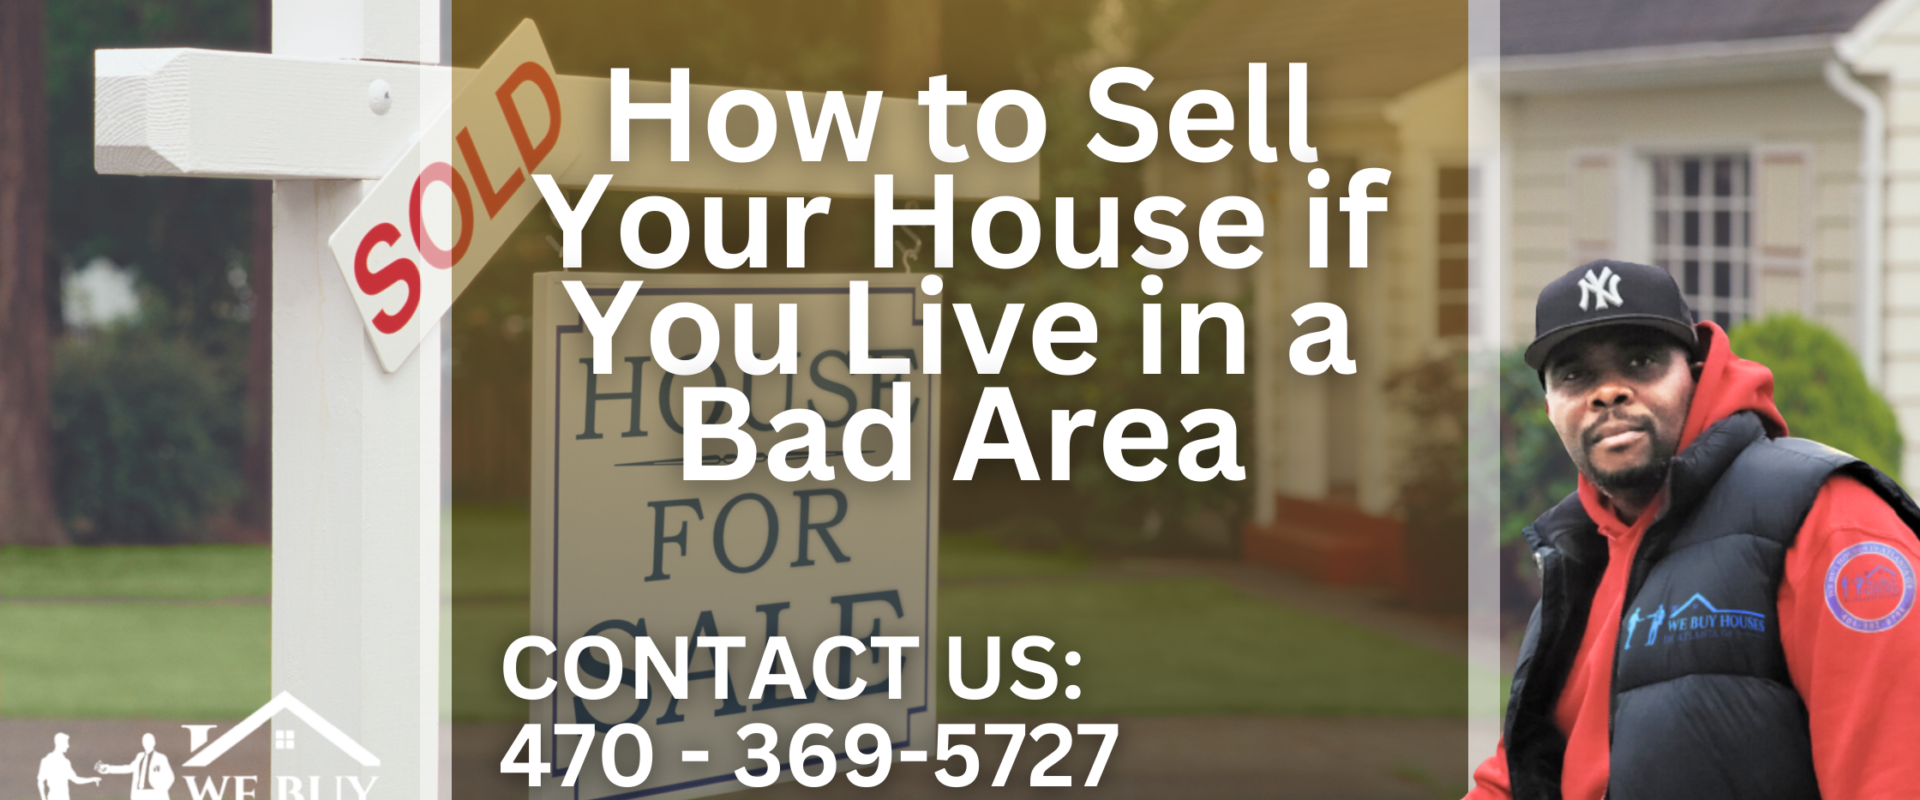 How to Sell Your House if You Live in a Bad Area